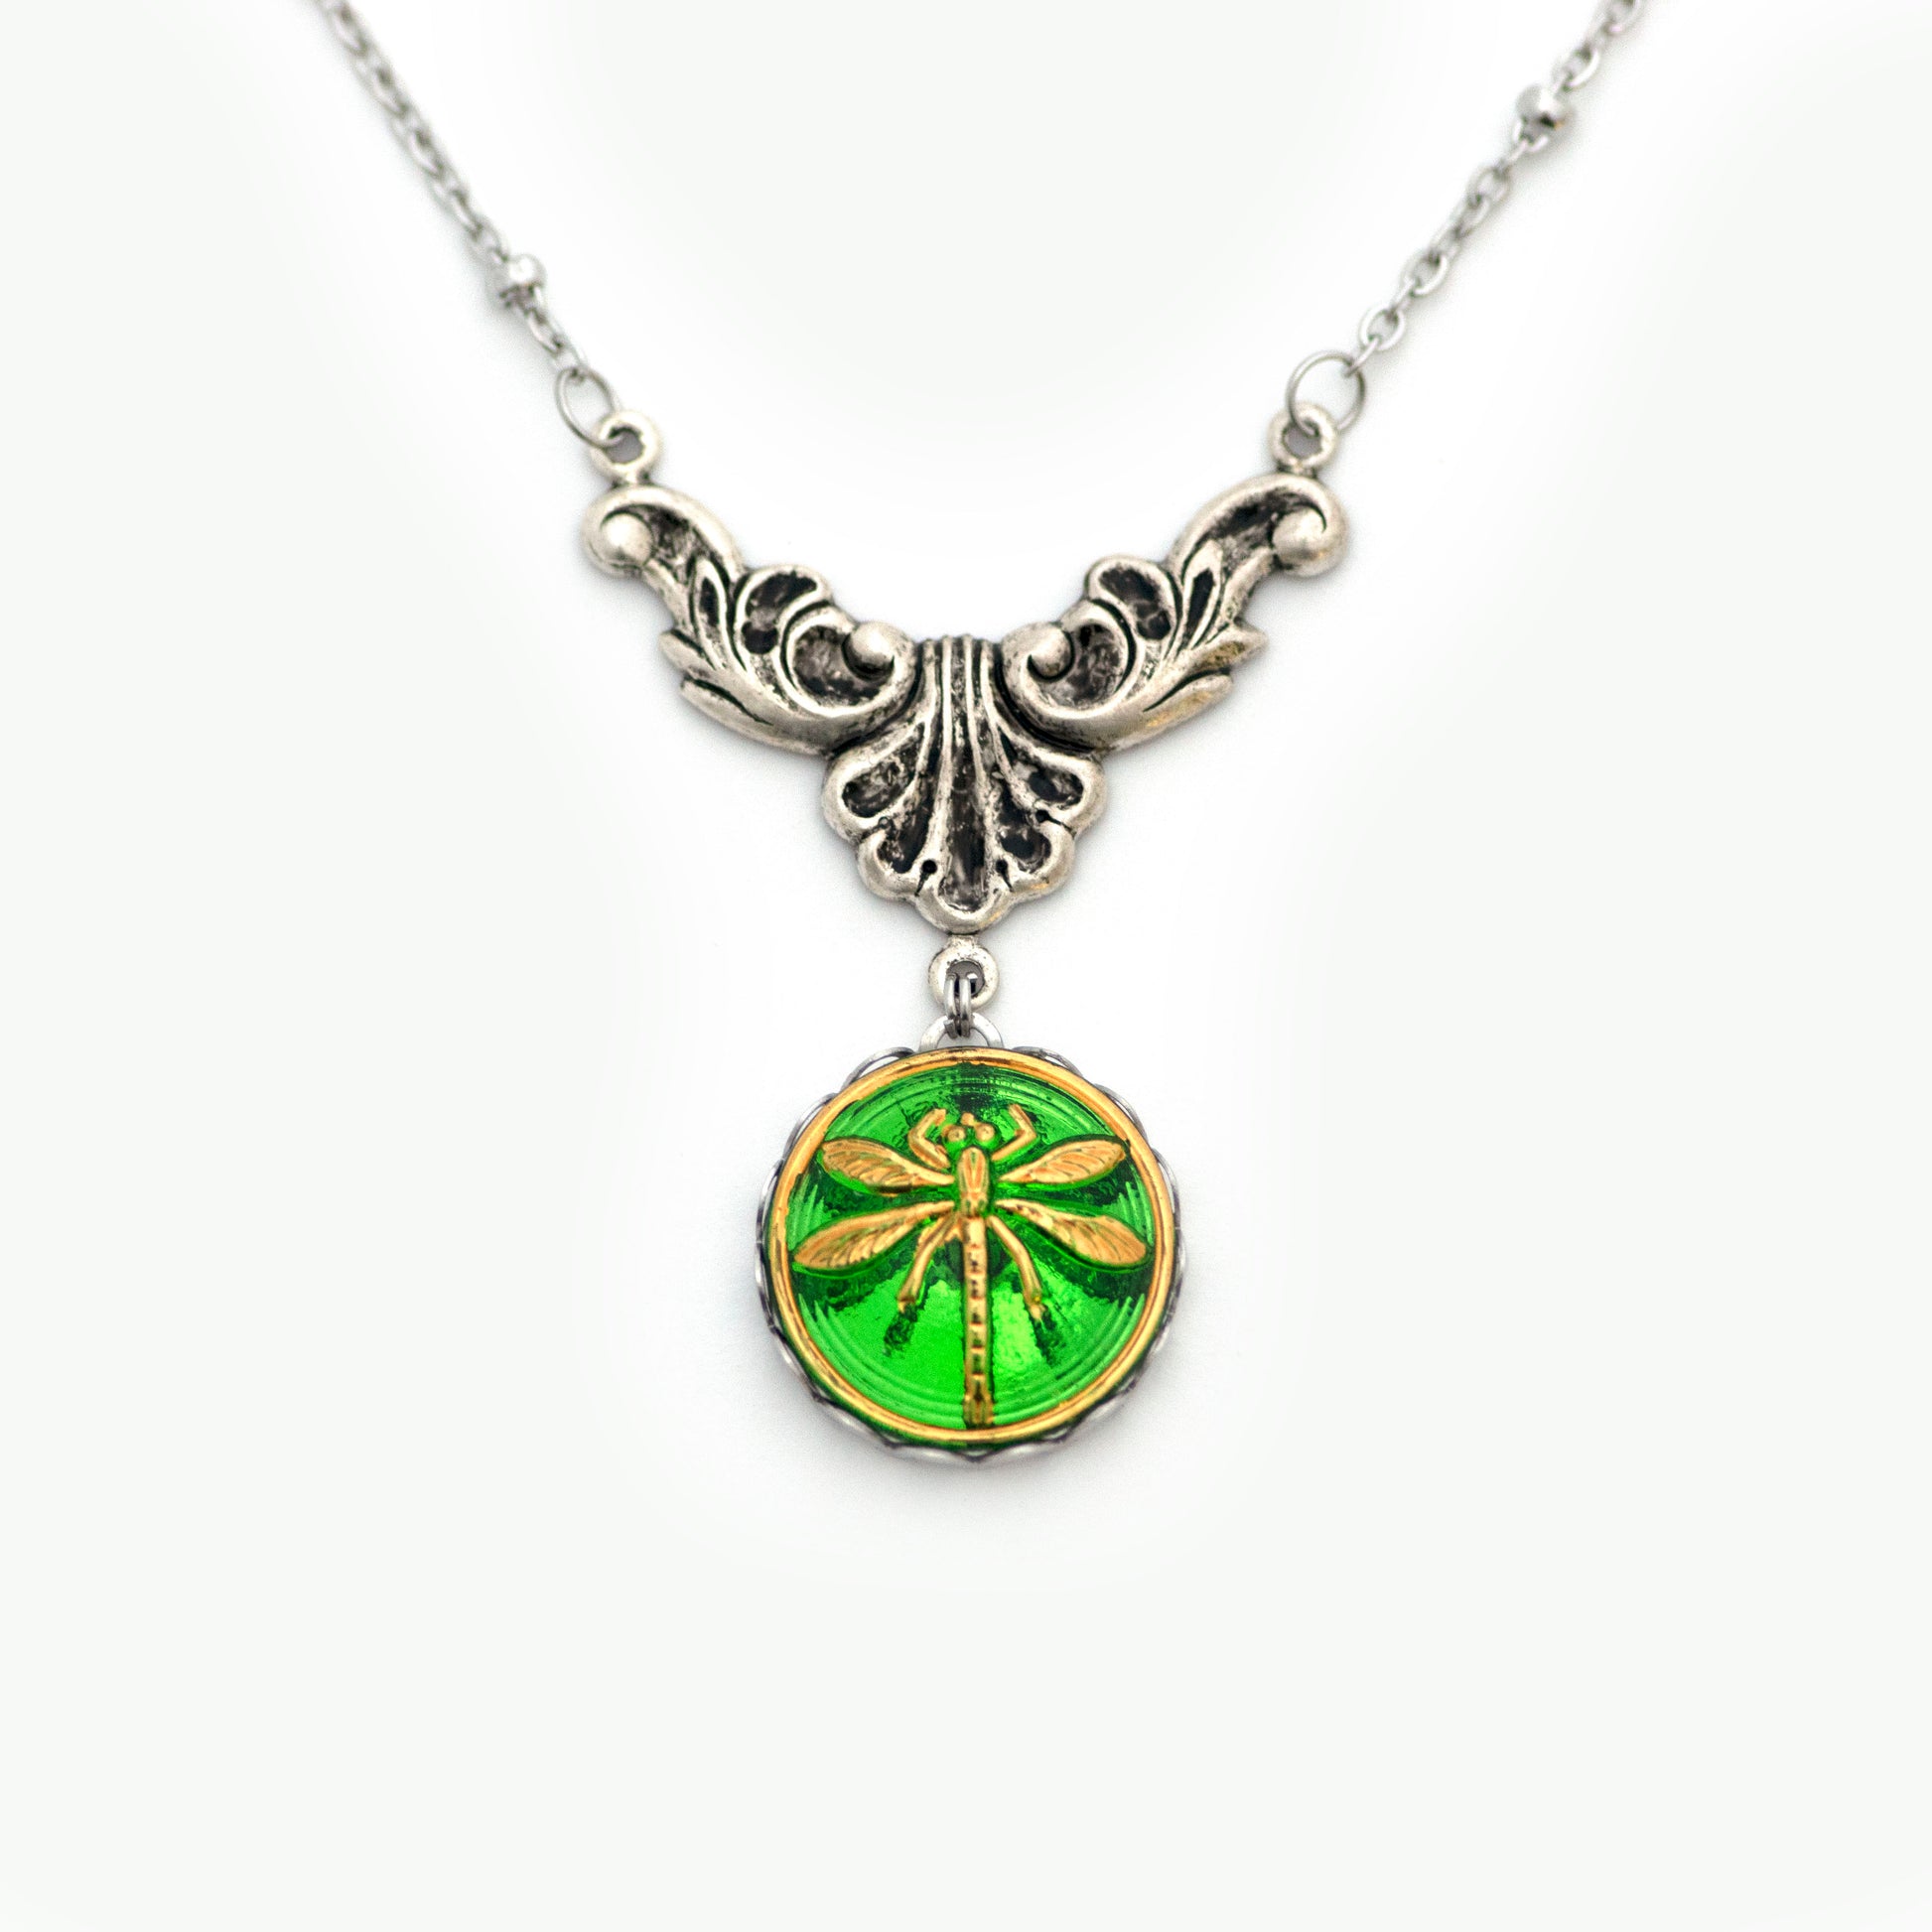 Green and gold painted dragonfly Czech glass button. Button pendant necklace.